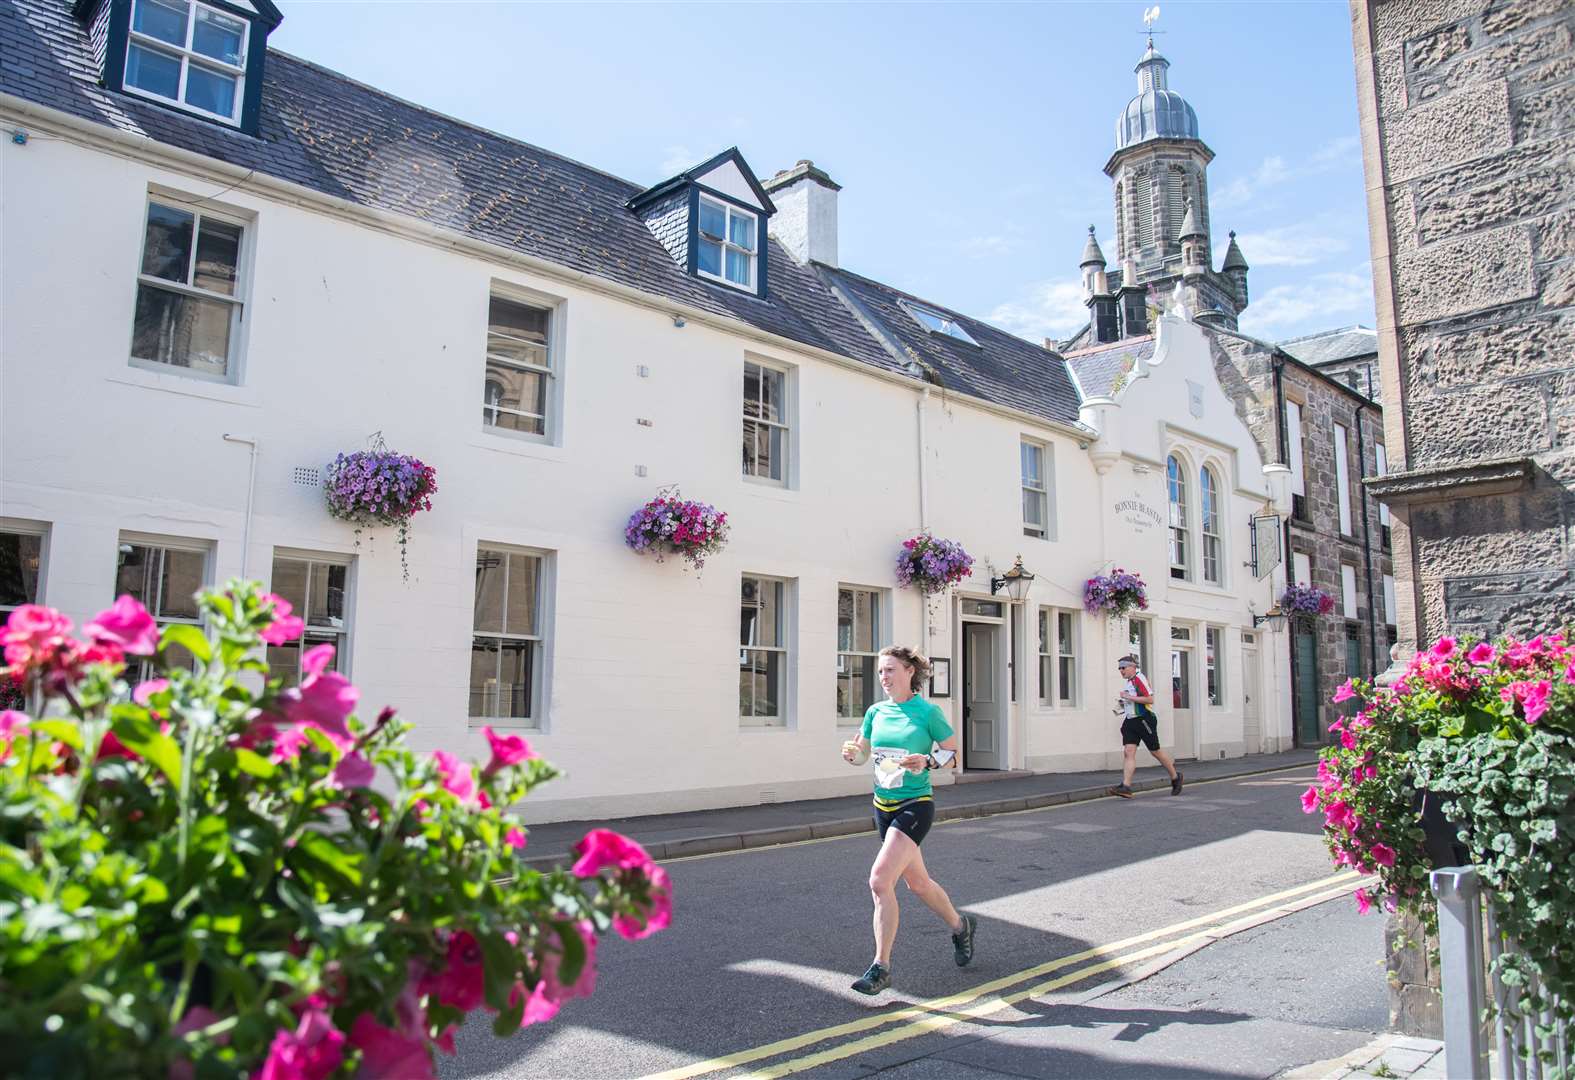 Forres was a picturesque setting for the Scottish 6 Days Orienteering Championships.